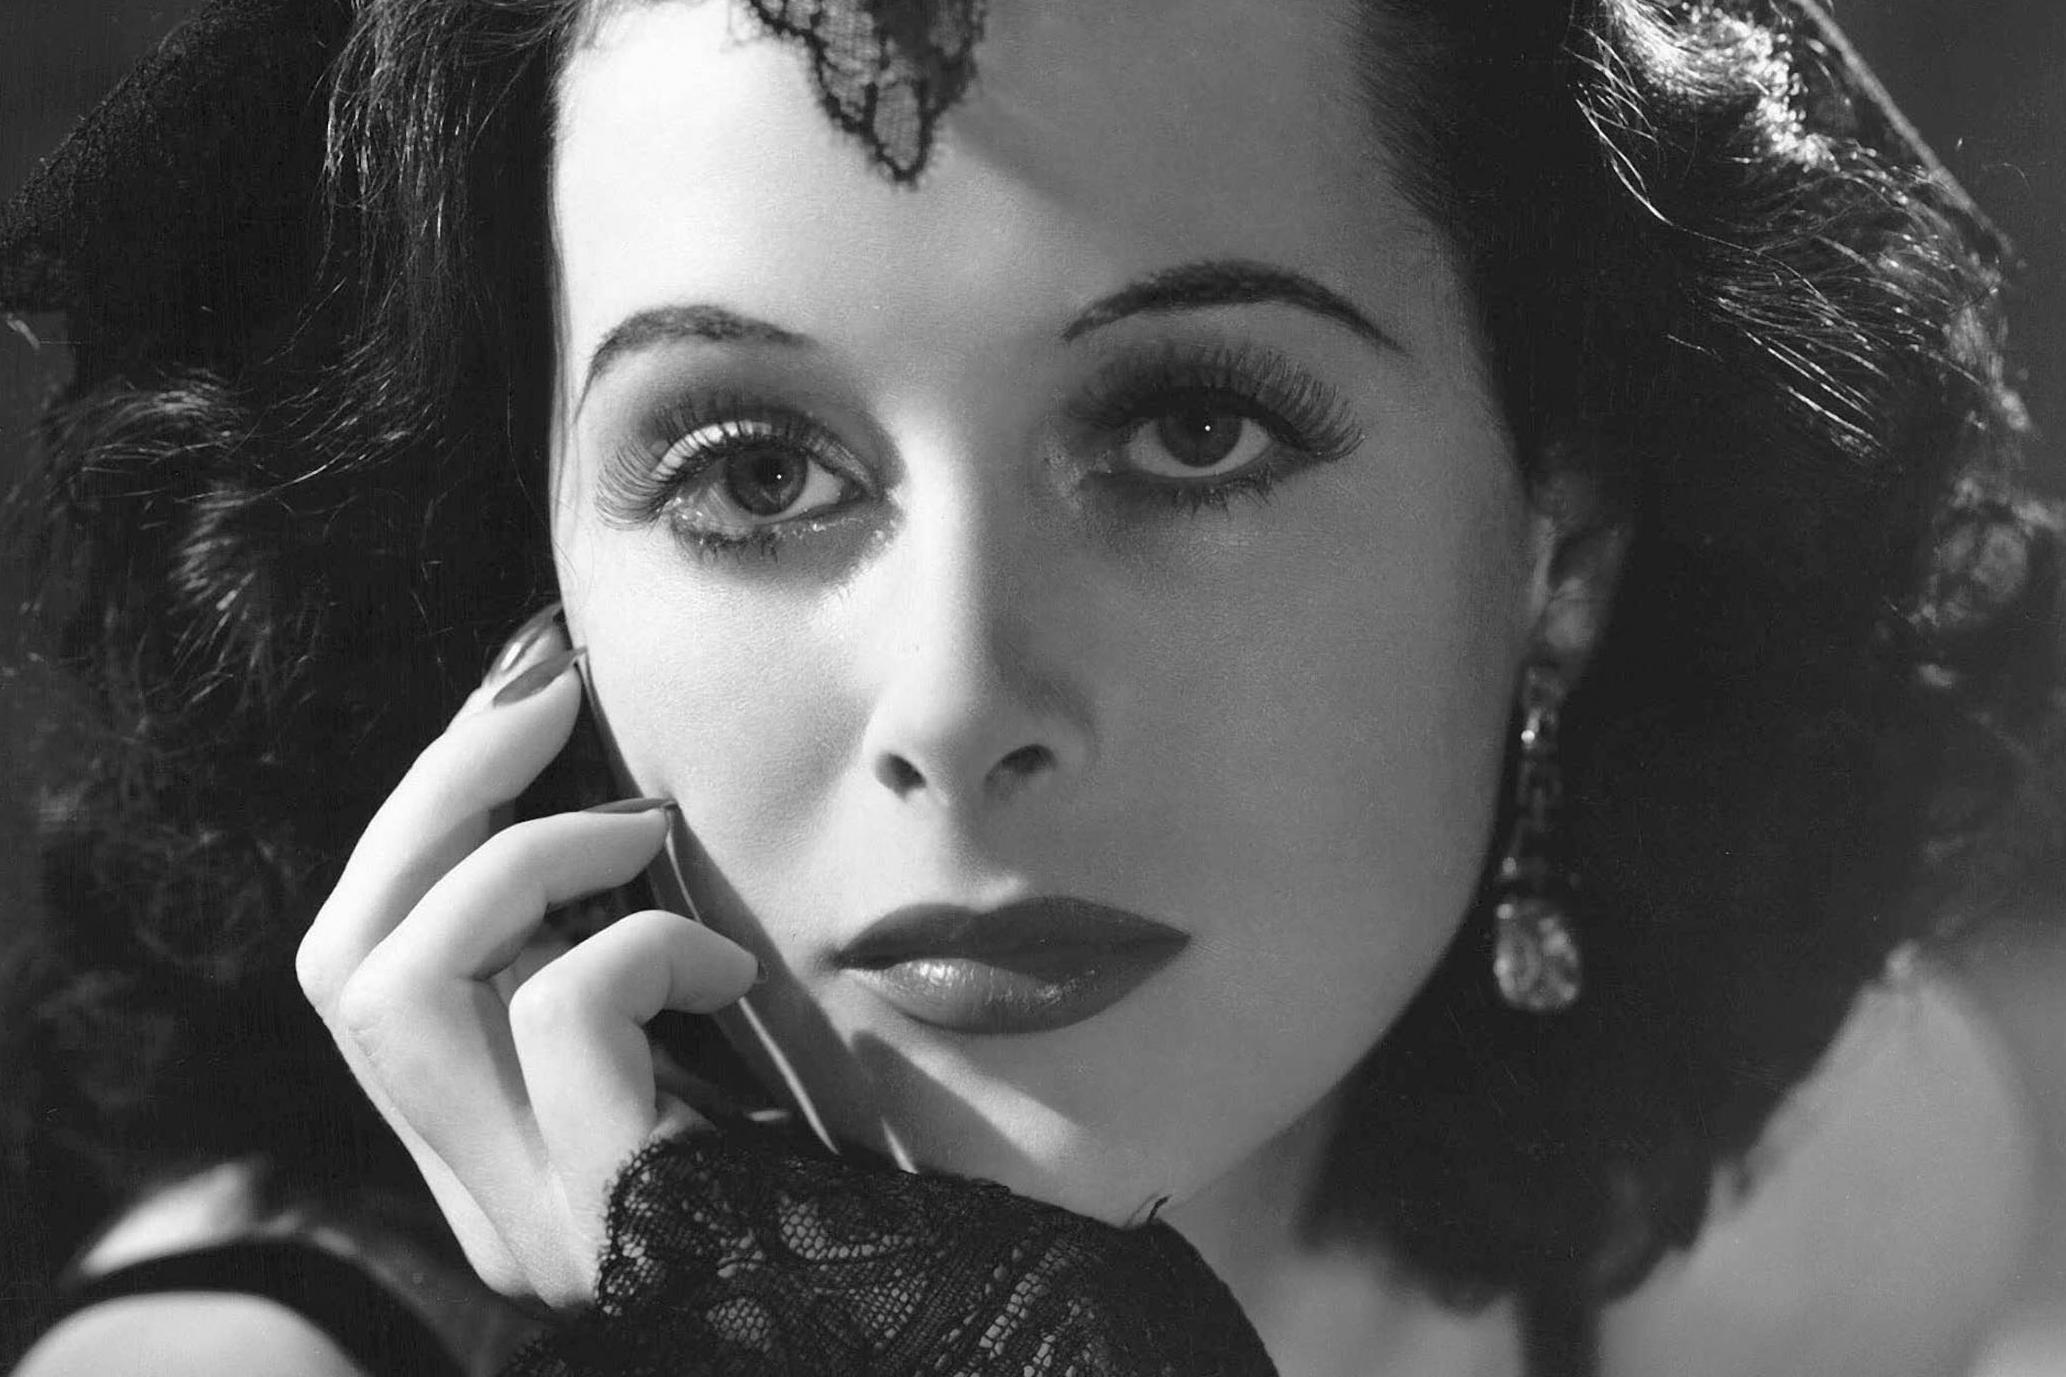 Hedy Lamarr The Hollywood bombshell whose genius the world tried to ignore The Independent The Independent